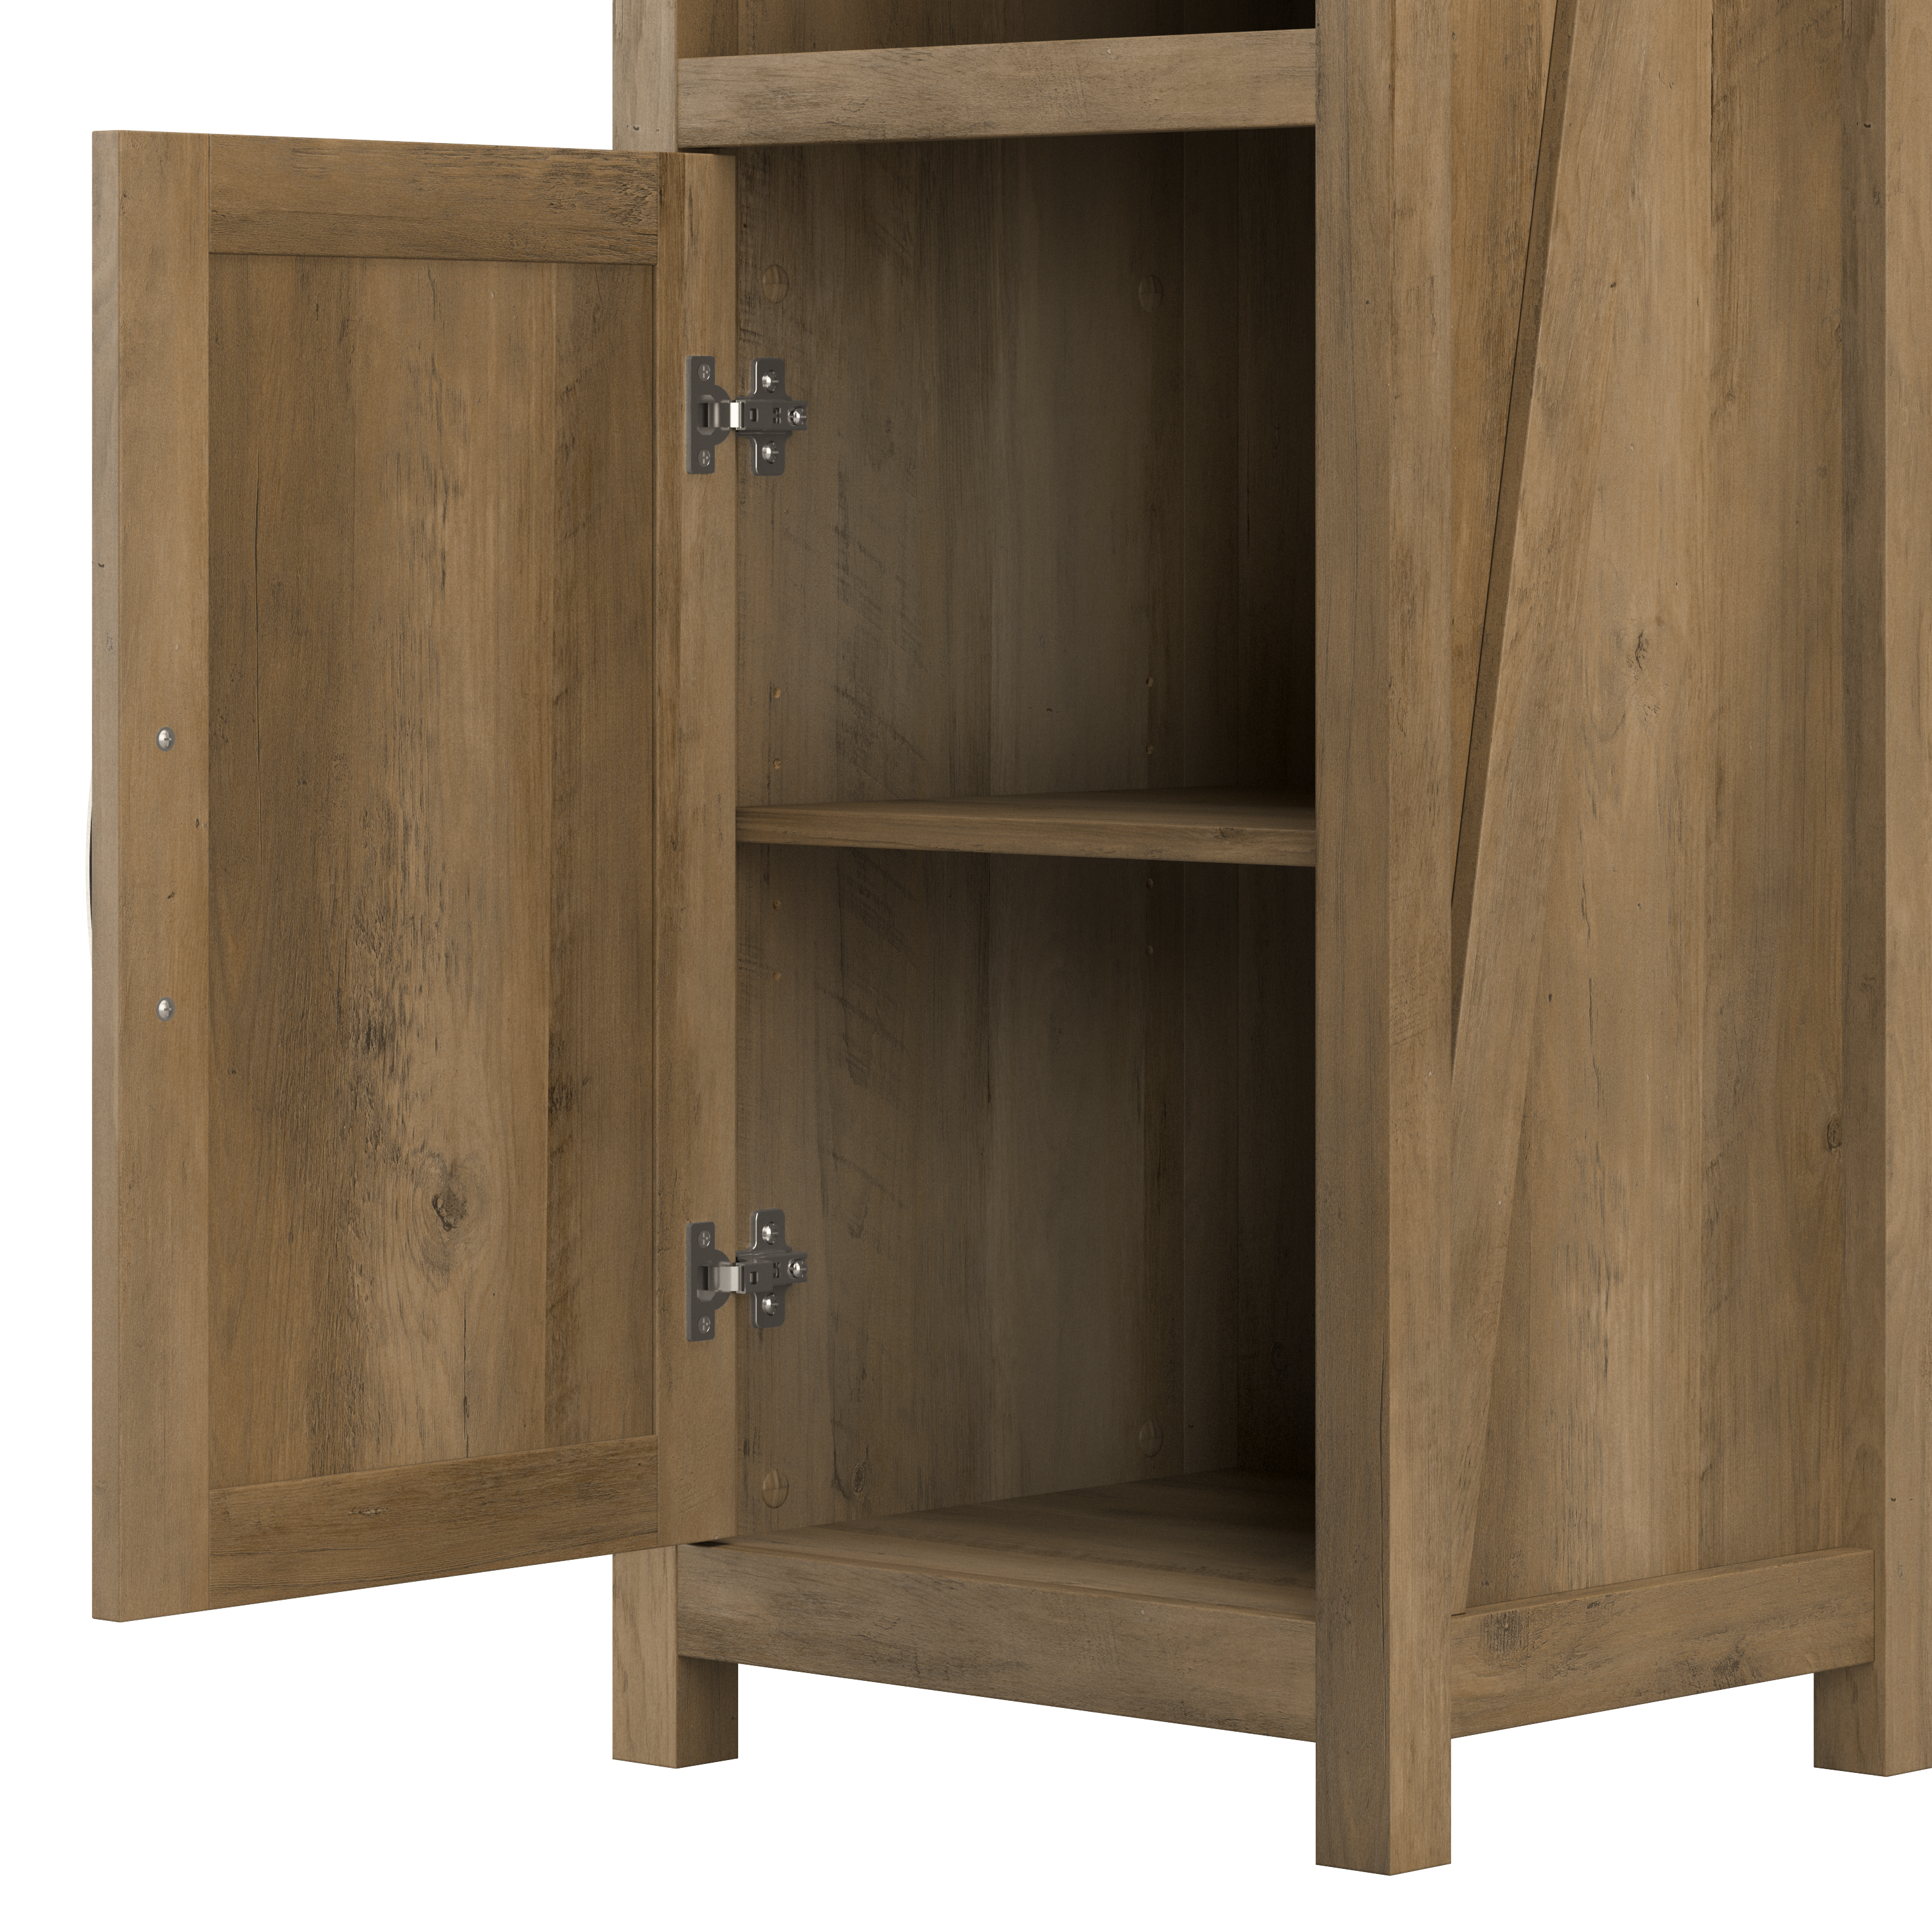 Shop Bush Furniture Knoxville Tall Narrow 5 Shelf Bookcase with Door 03 CGB118RCP-03 #color_reclaimed pine